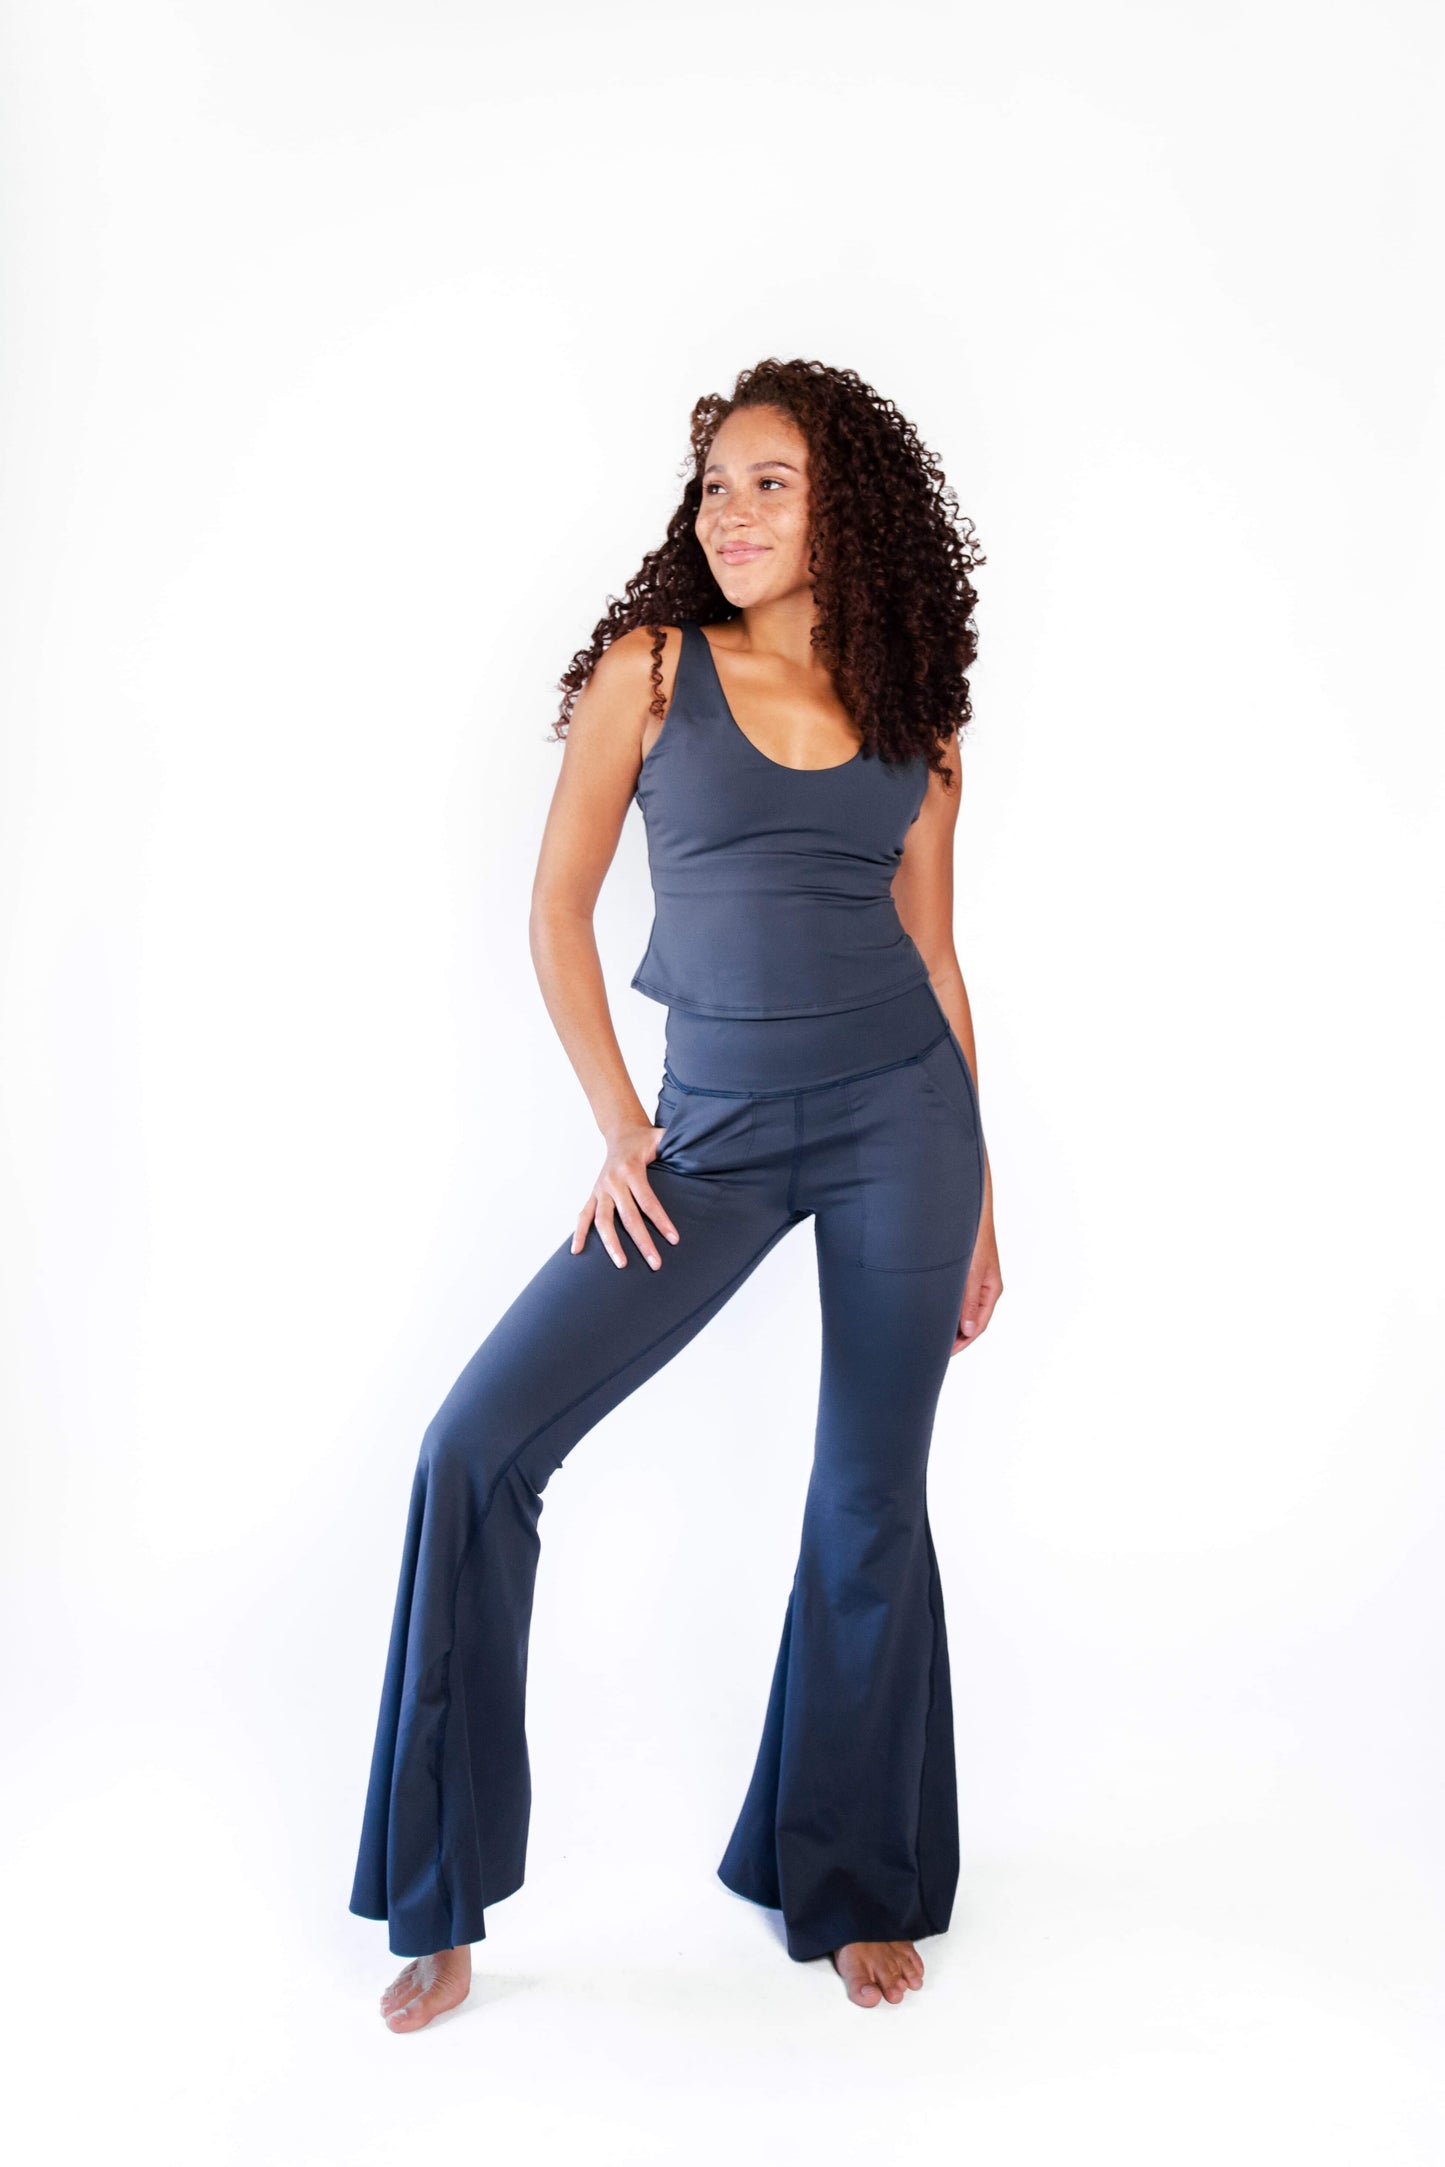 Bell Bottoms 2.0 in Navy Blue by Yoga Democracy